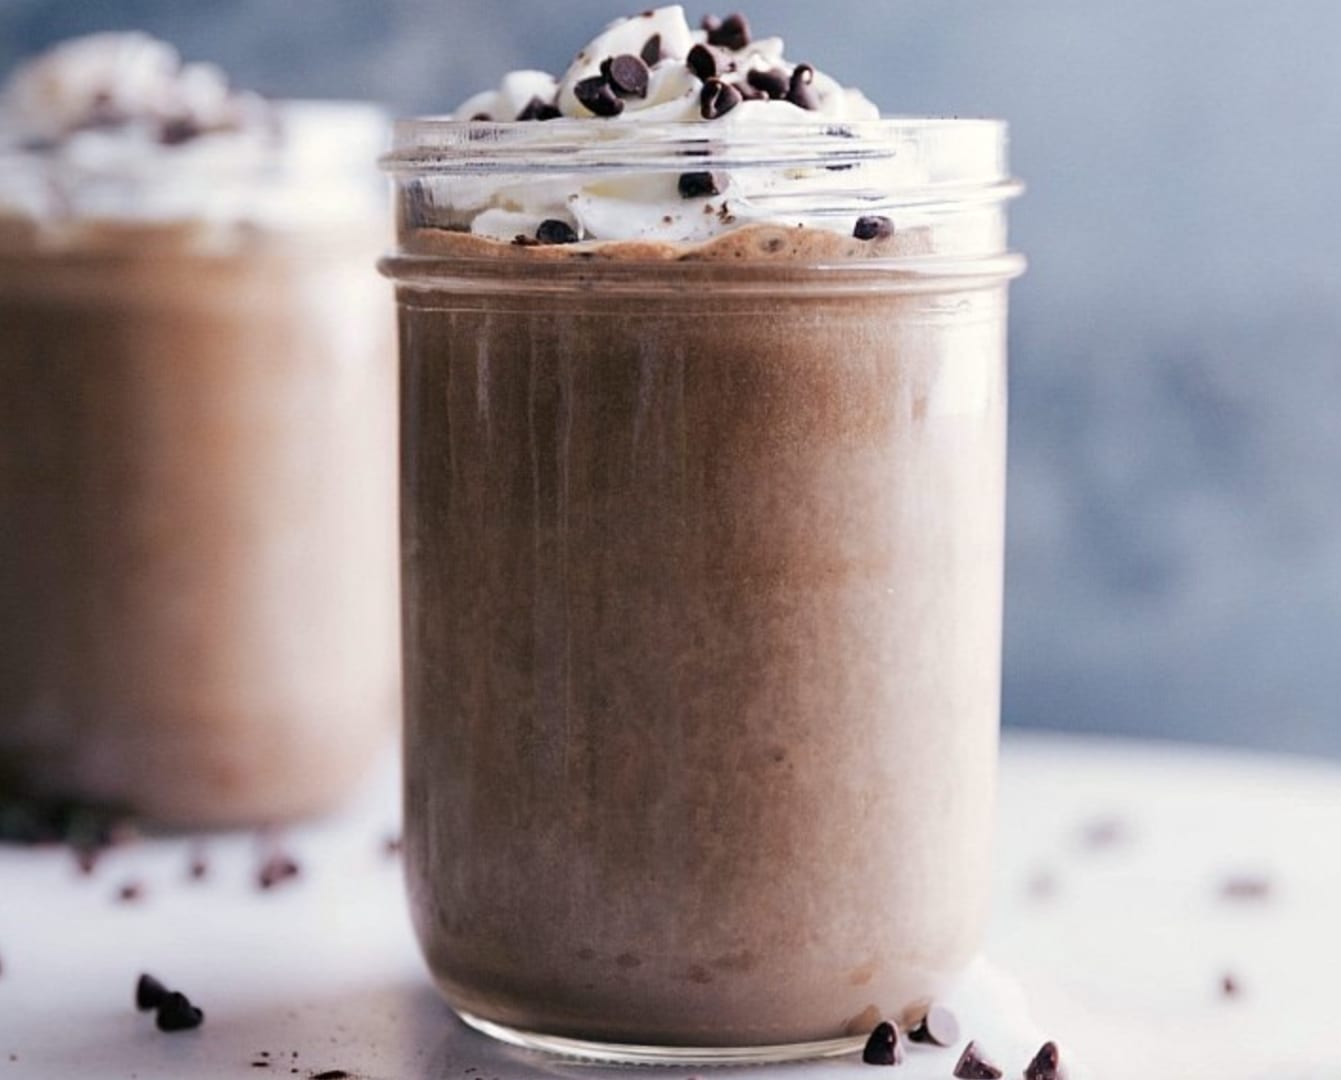 12 Ridiculously Good Protein Shake Recipes!